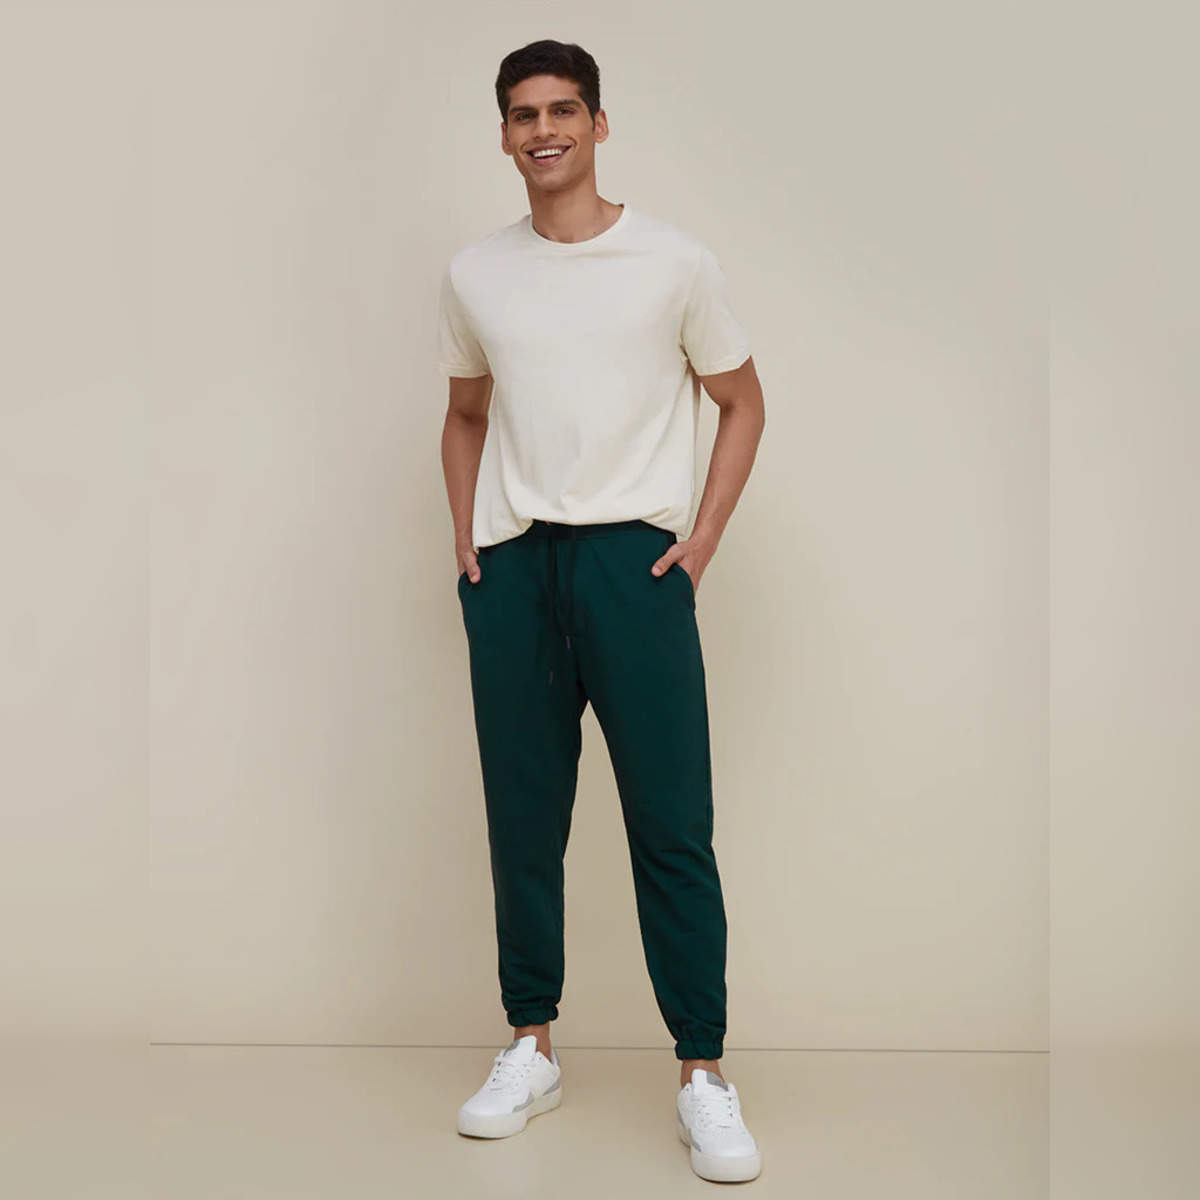 Shop for Textured 4 Way Stretch Pants with Reflective Detail for men Online  in India | Cultsport